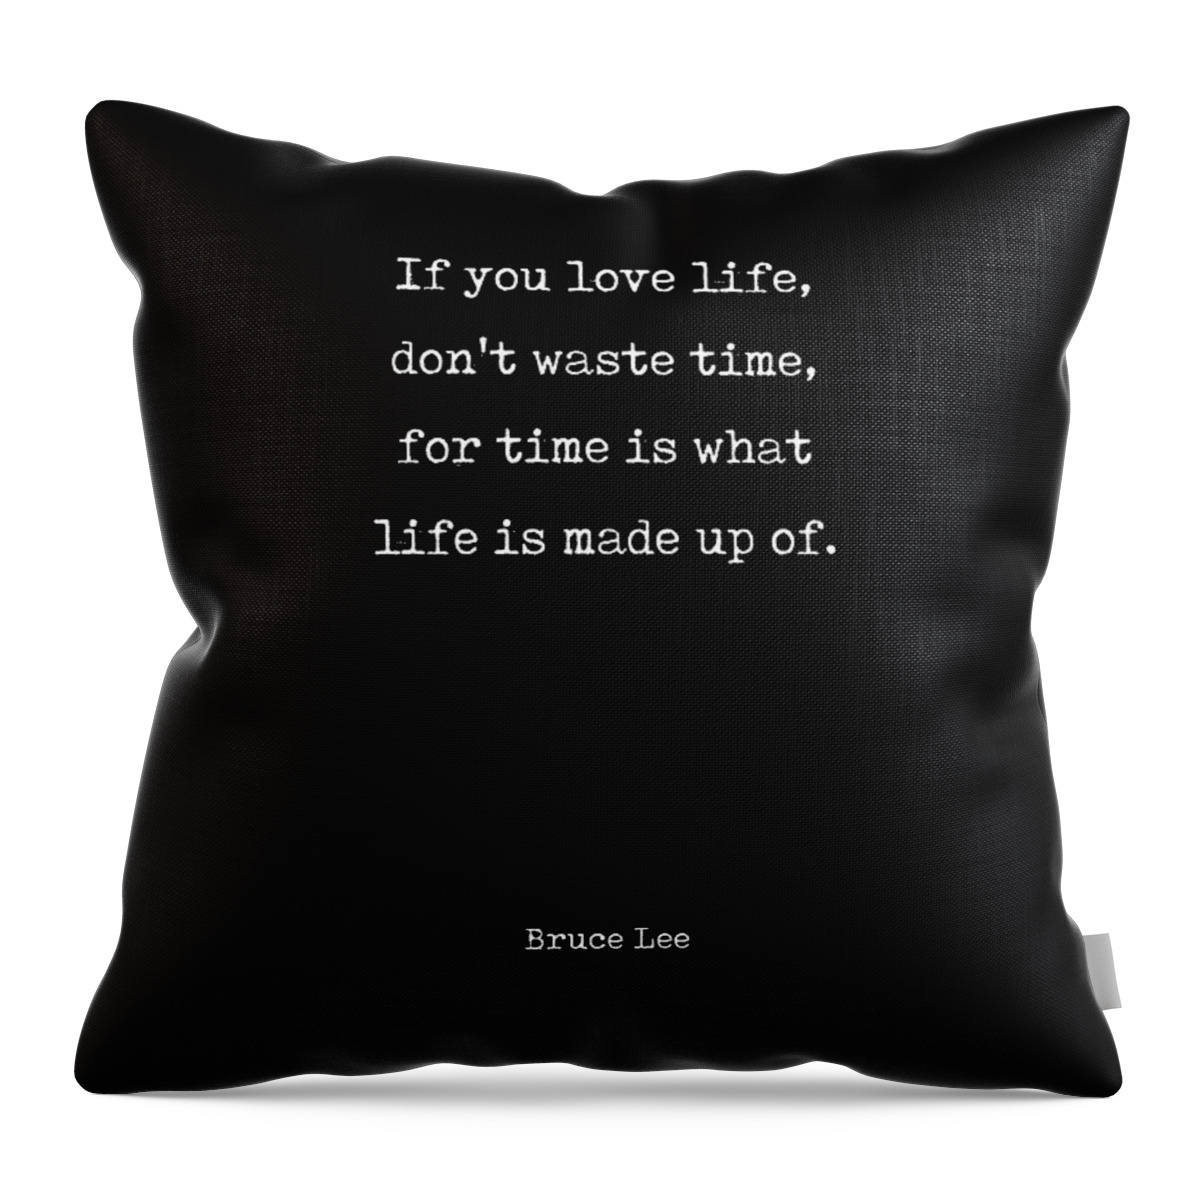 Bruce Lee Throw Pillow featuring the digital art Don't Waste Time 3 - Bruce Lee Quote - Motivational, Inspiring Print by Studio Grafiikka